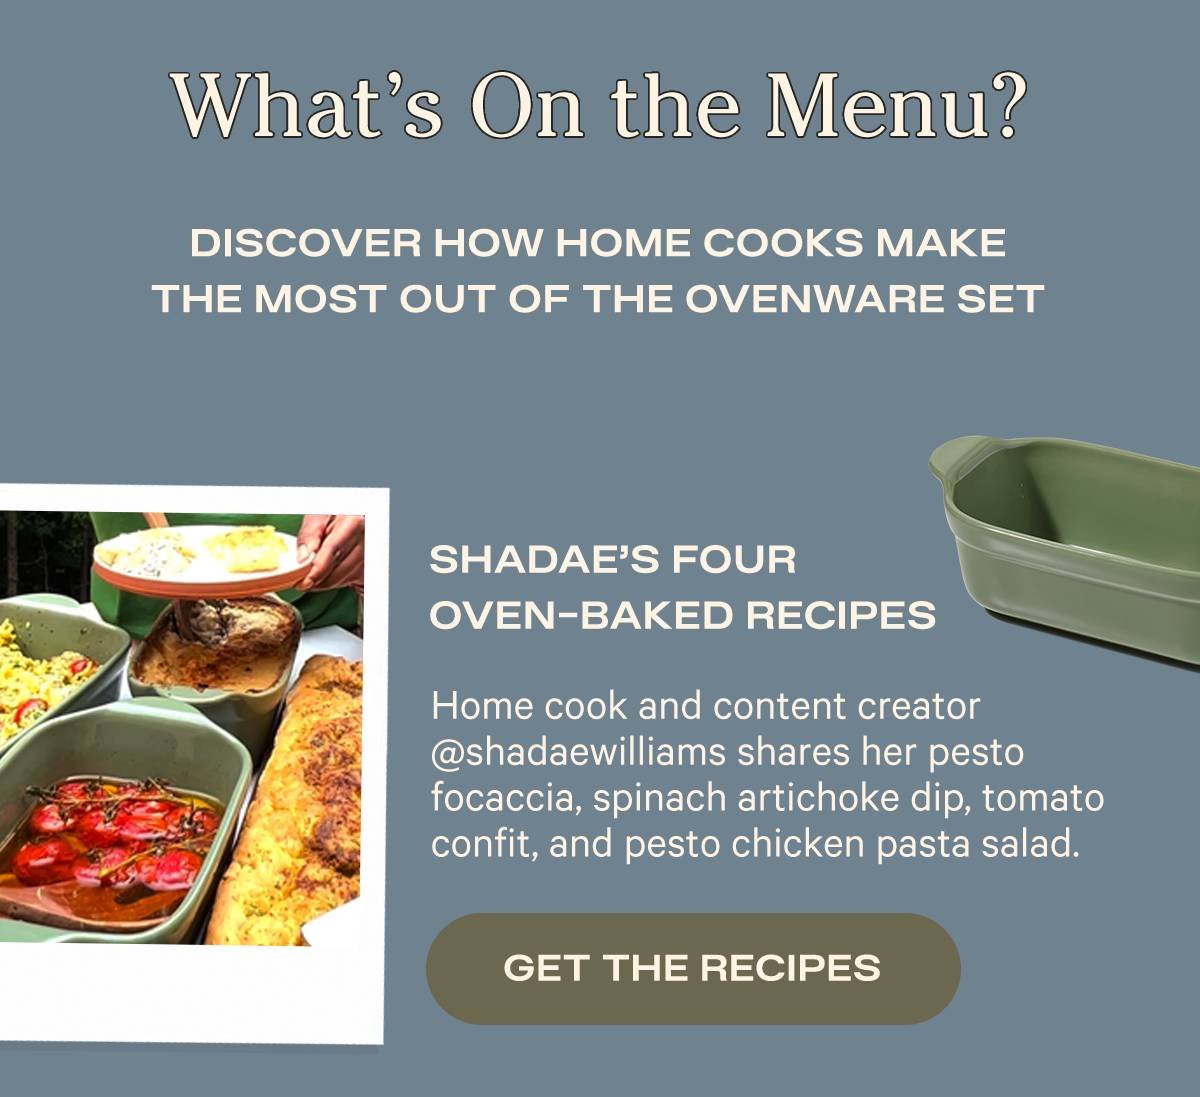 Shadae's Four Oven Baked Recipes